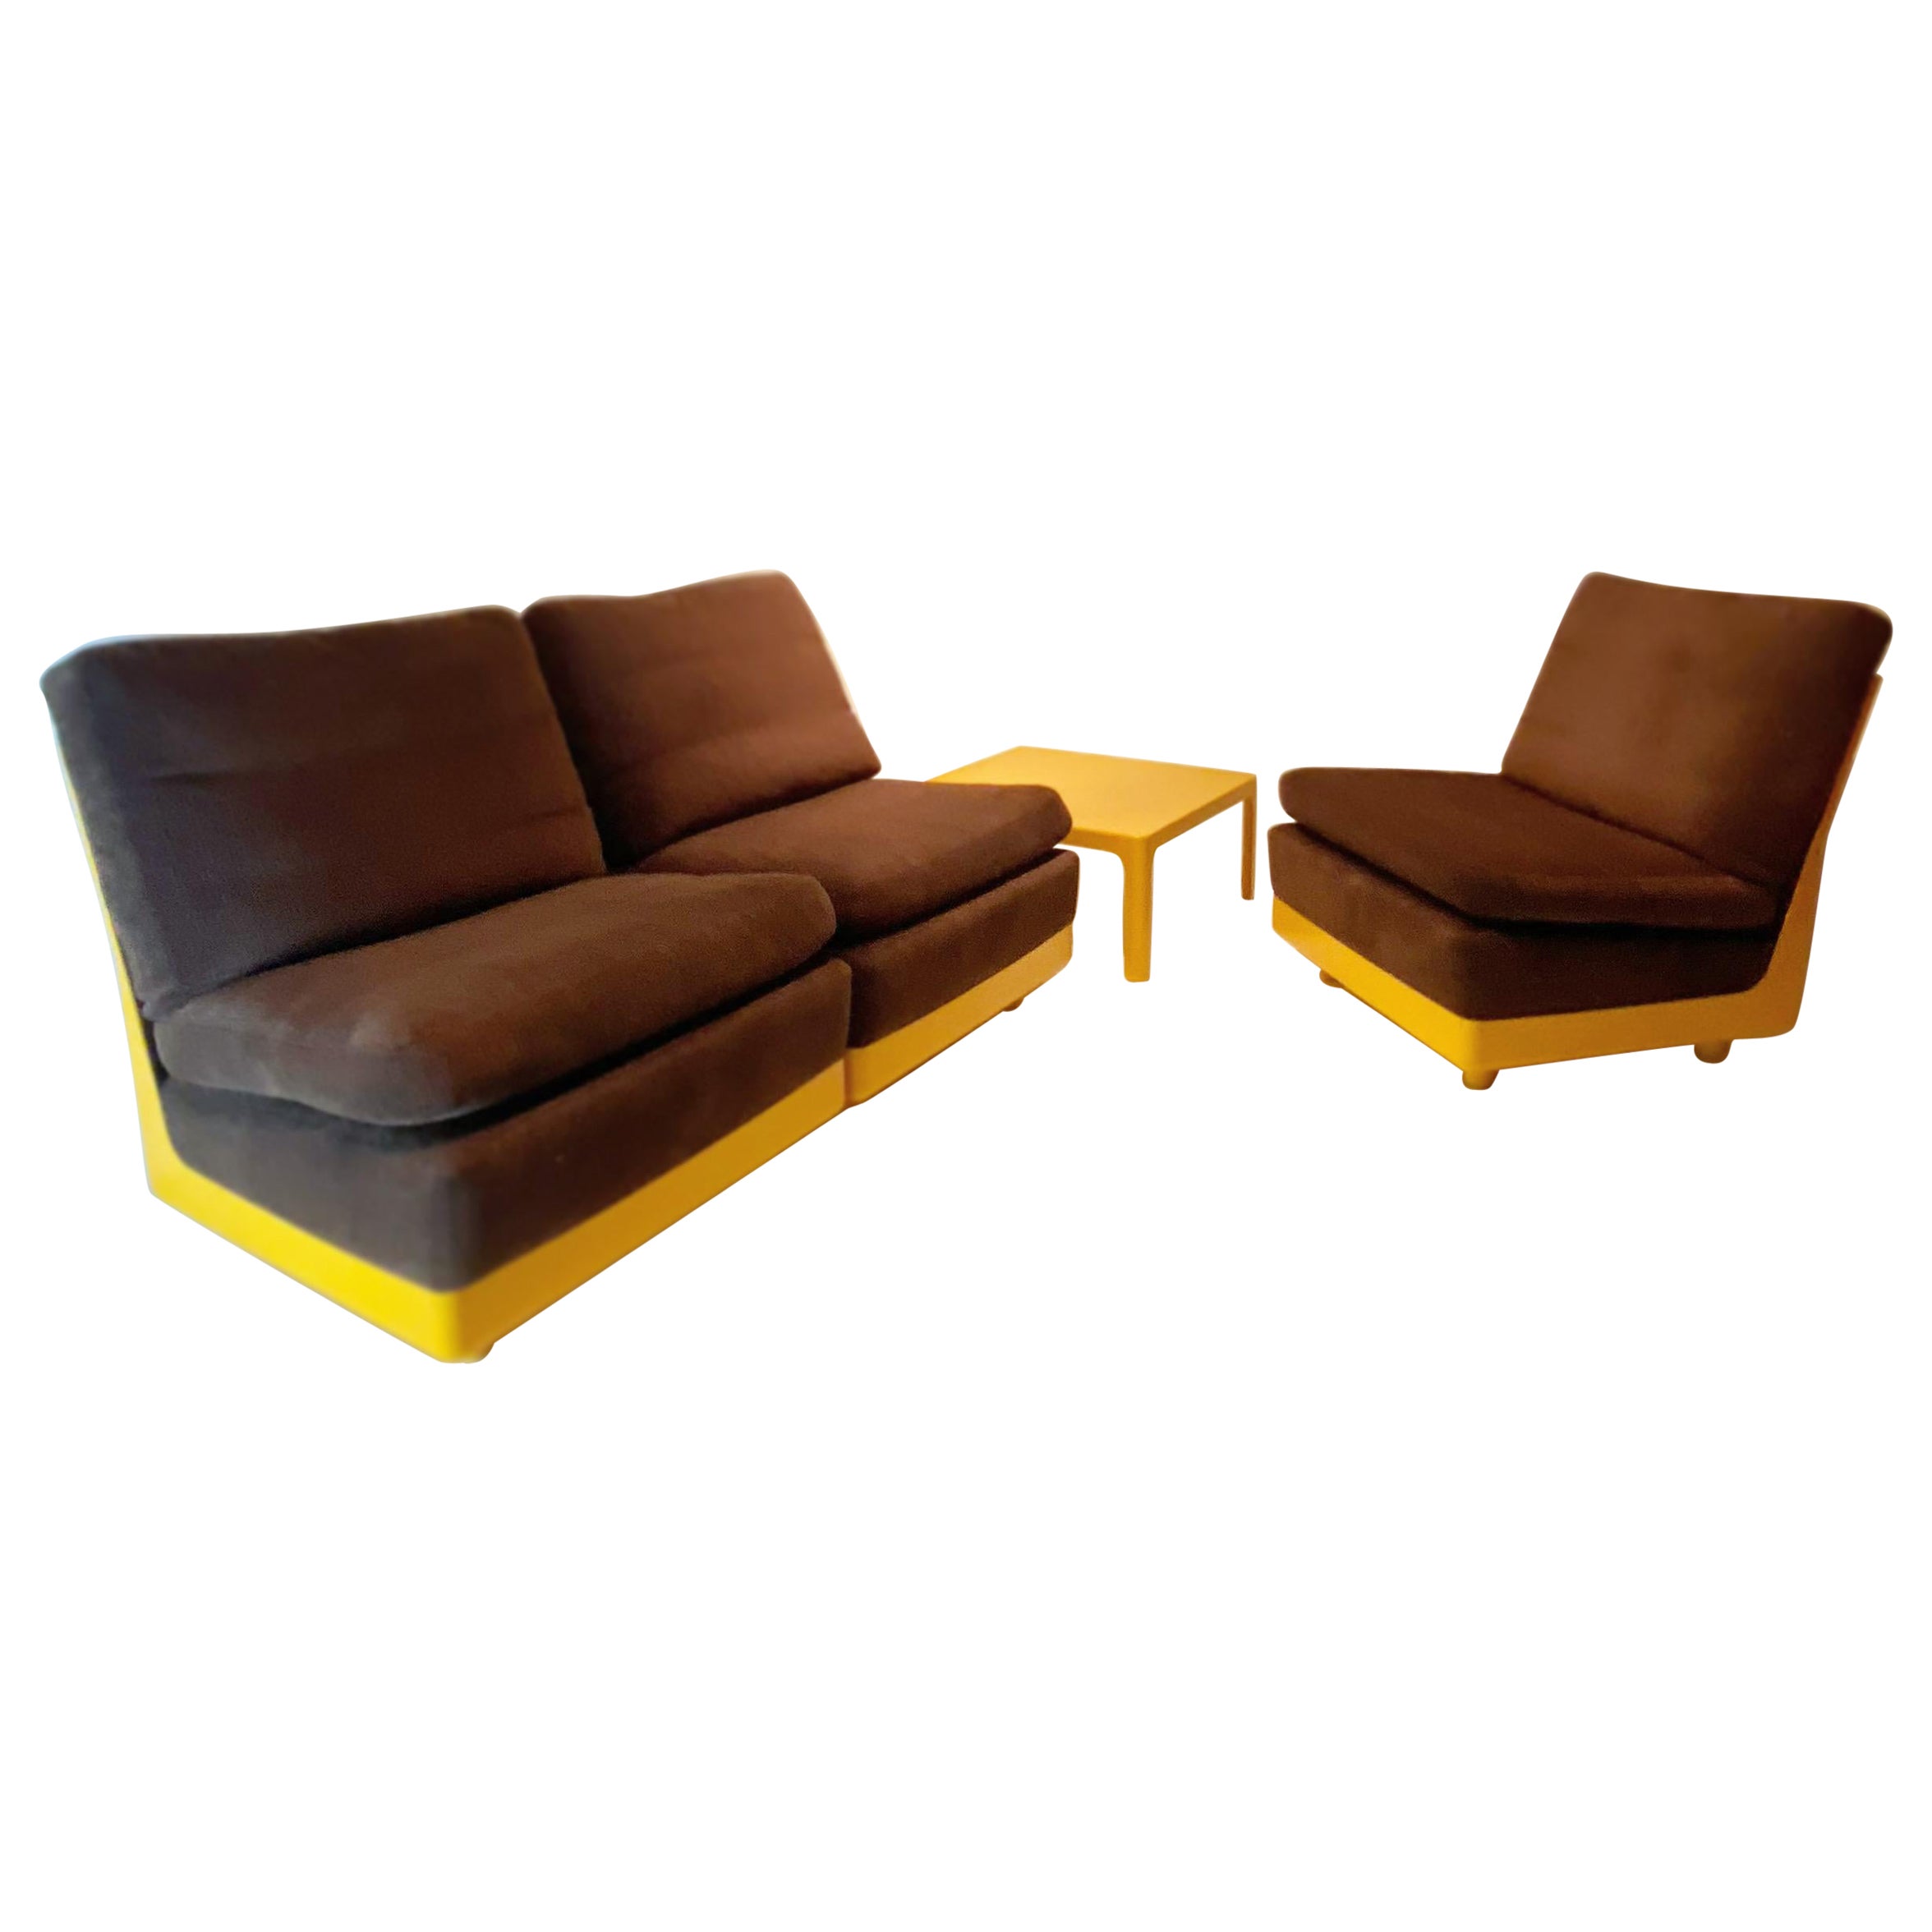 Original set of three yellow seats and coffee table by Wolfgang Feierbach 1974. For Sale